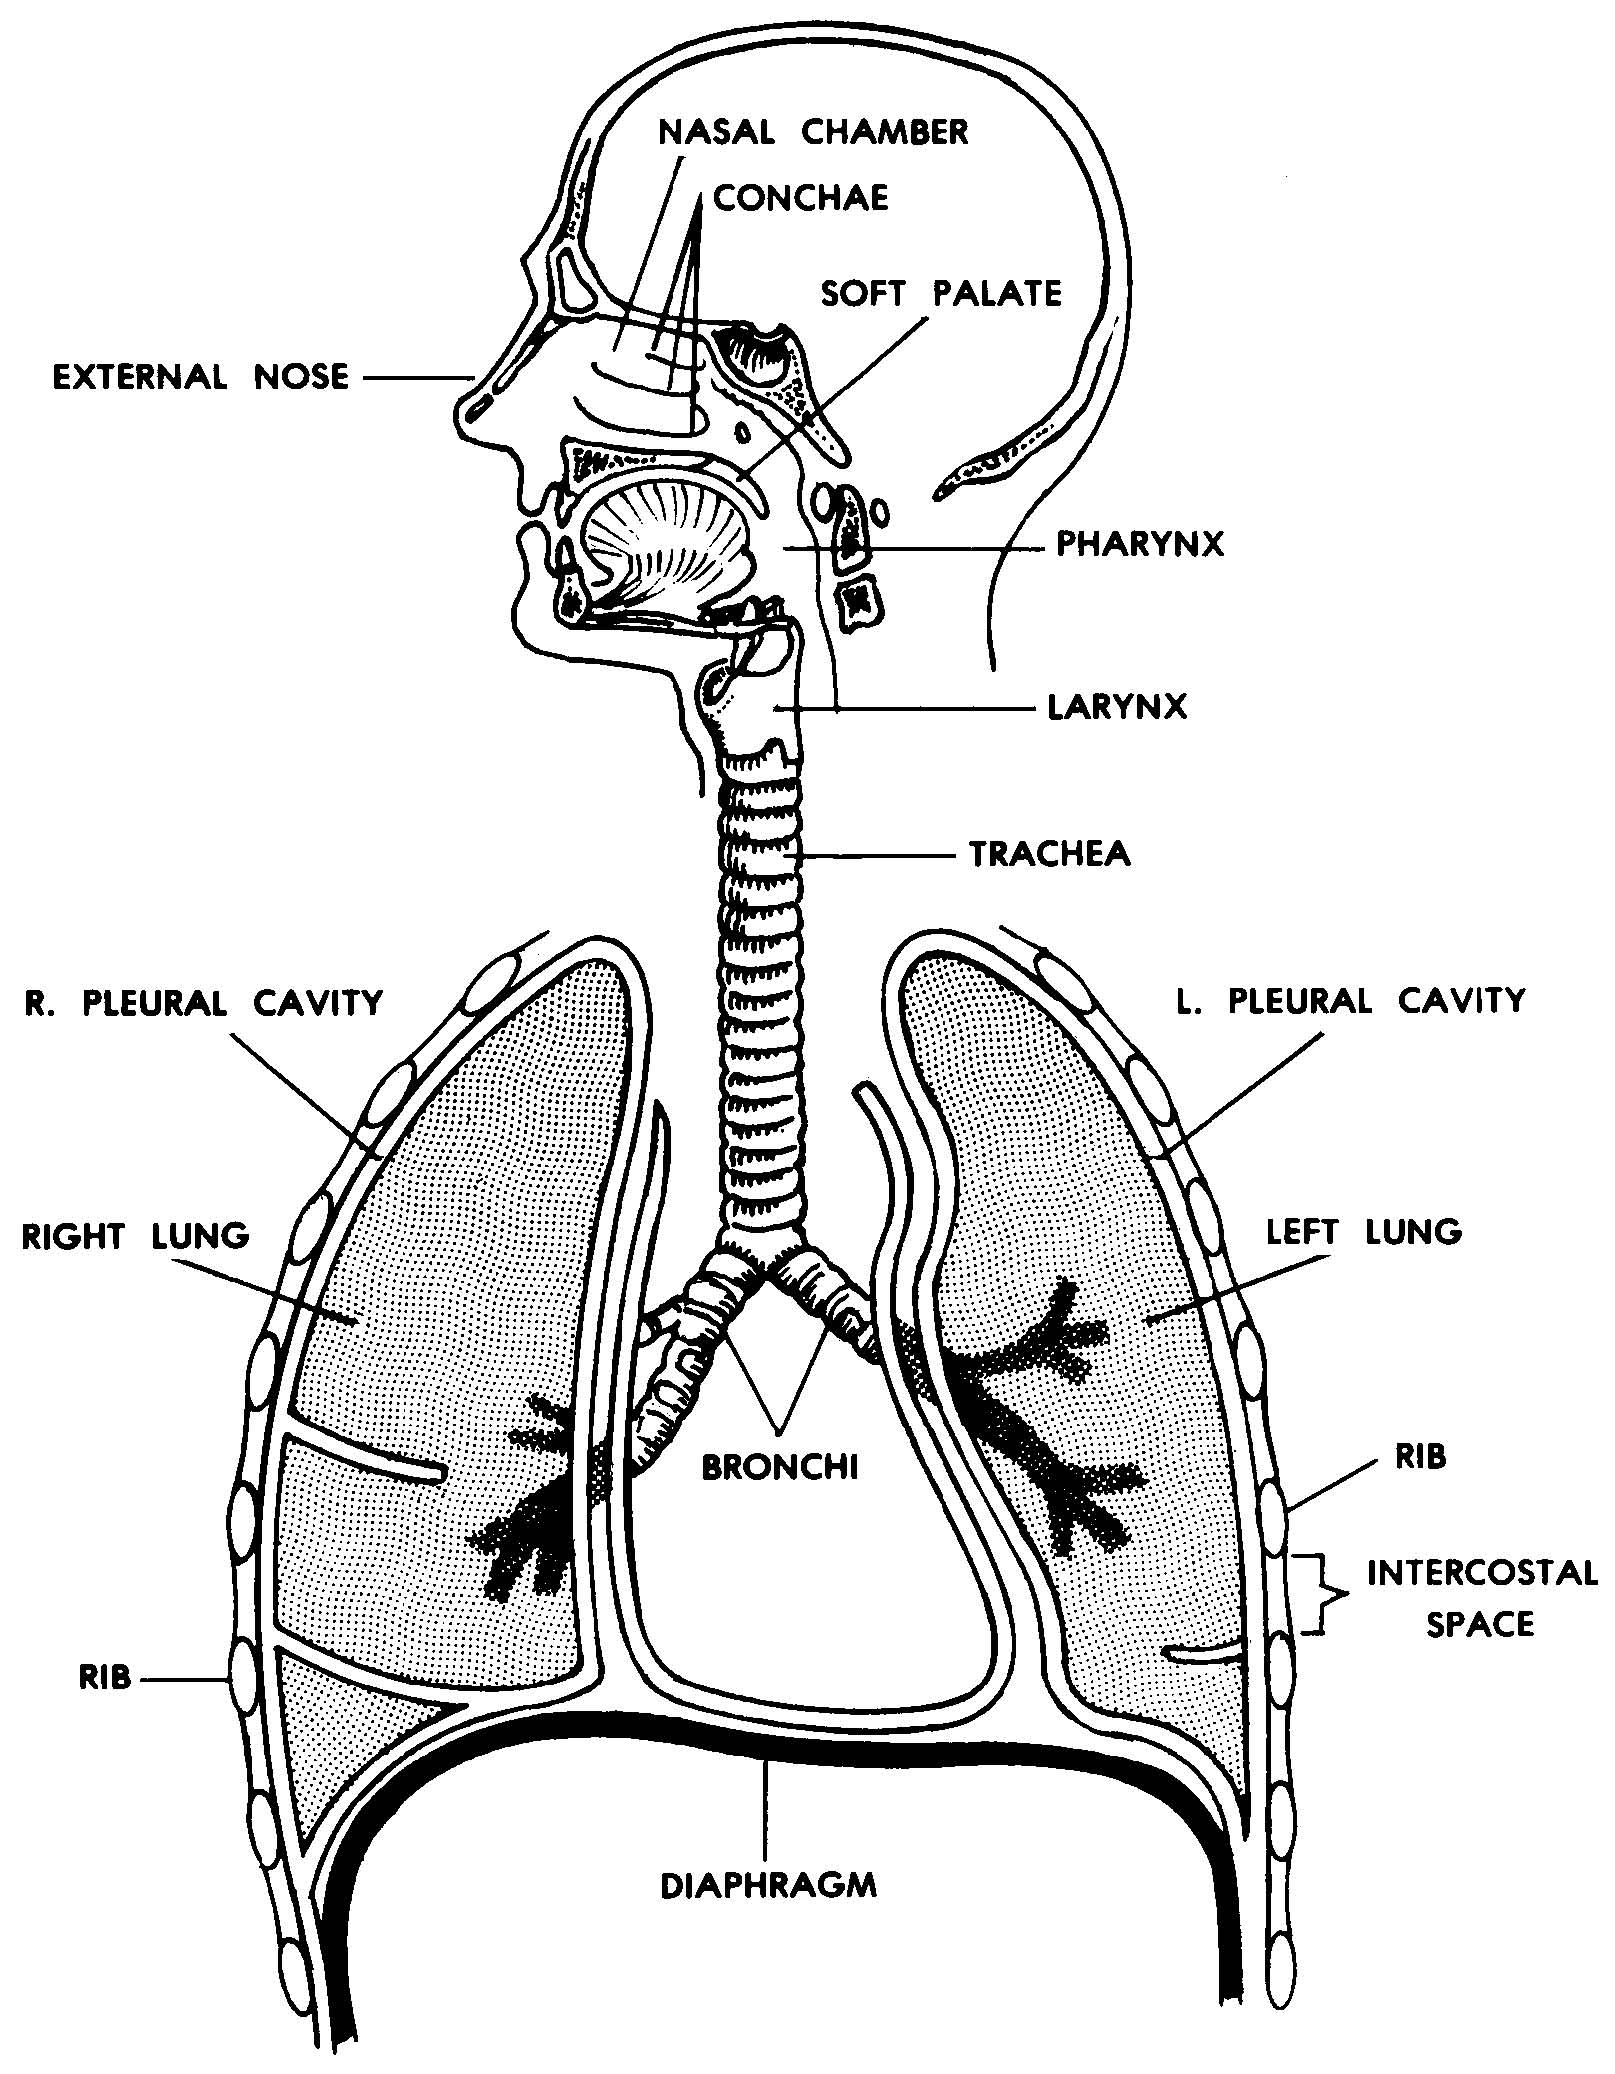 what portions of the respiratory system are anatomical dead space